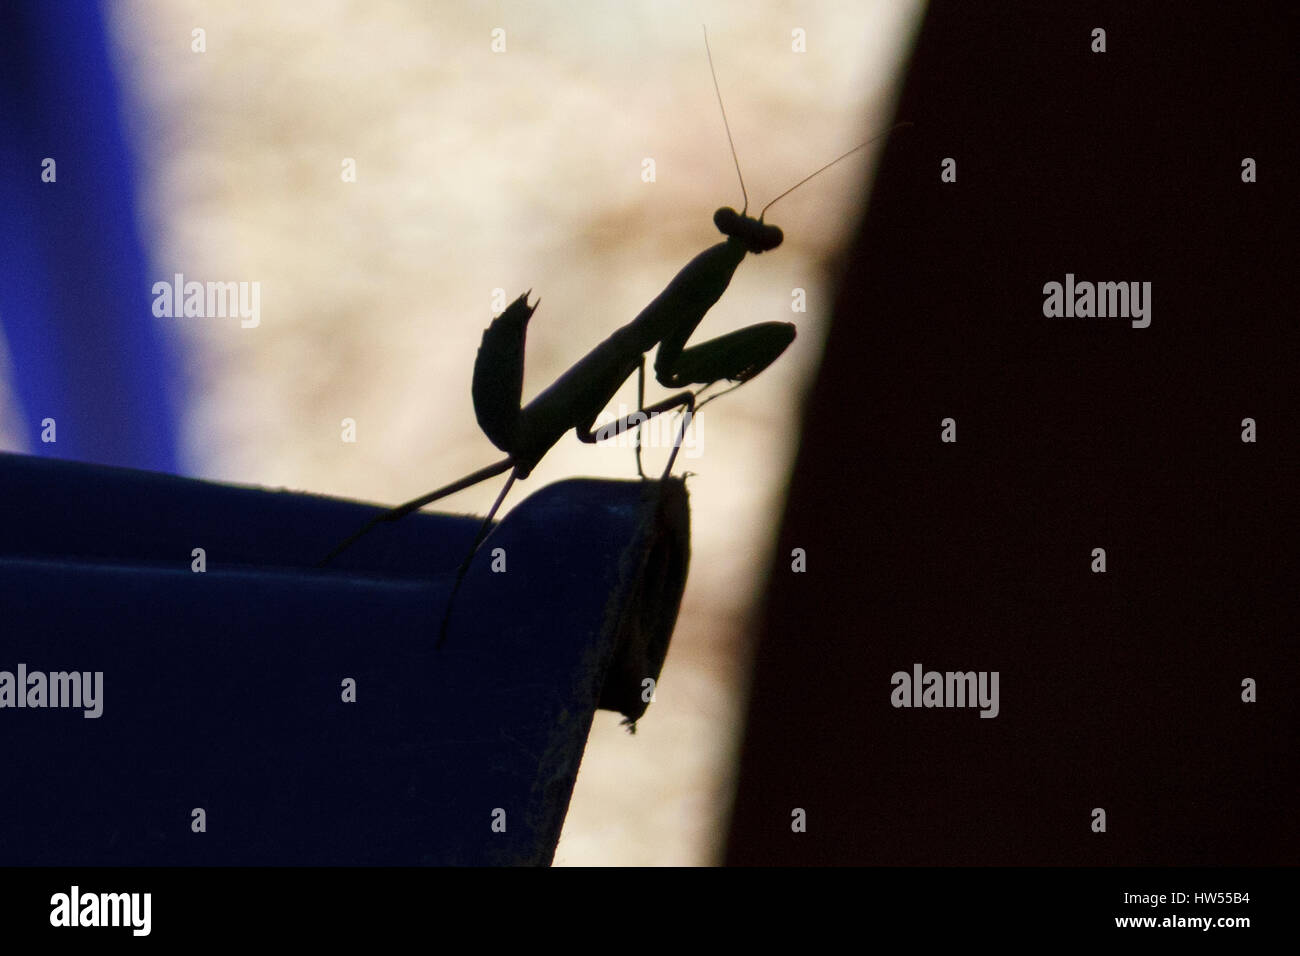 The shadow mantis. Predatory insects. Stock Photo